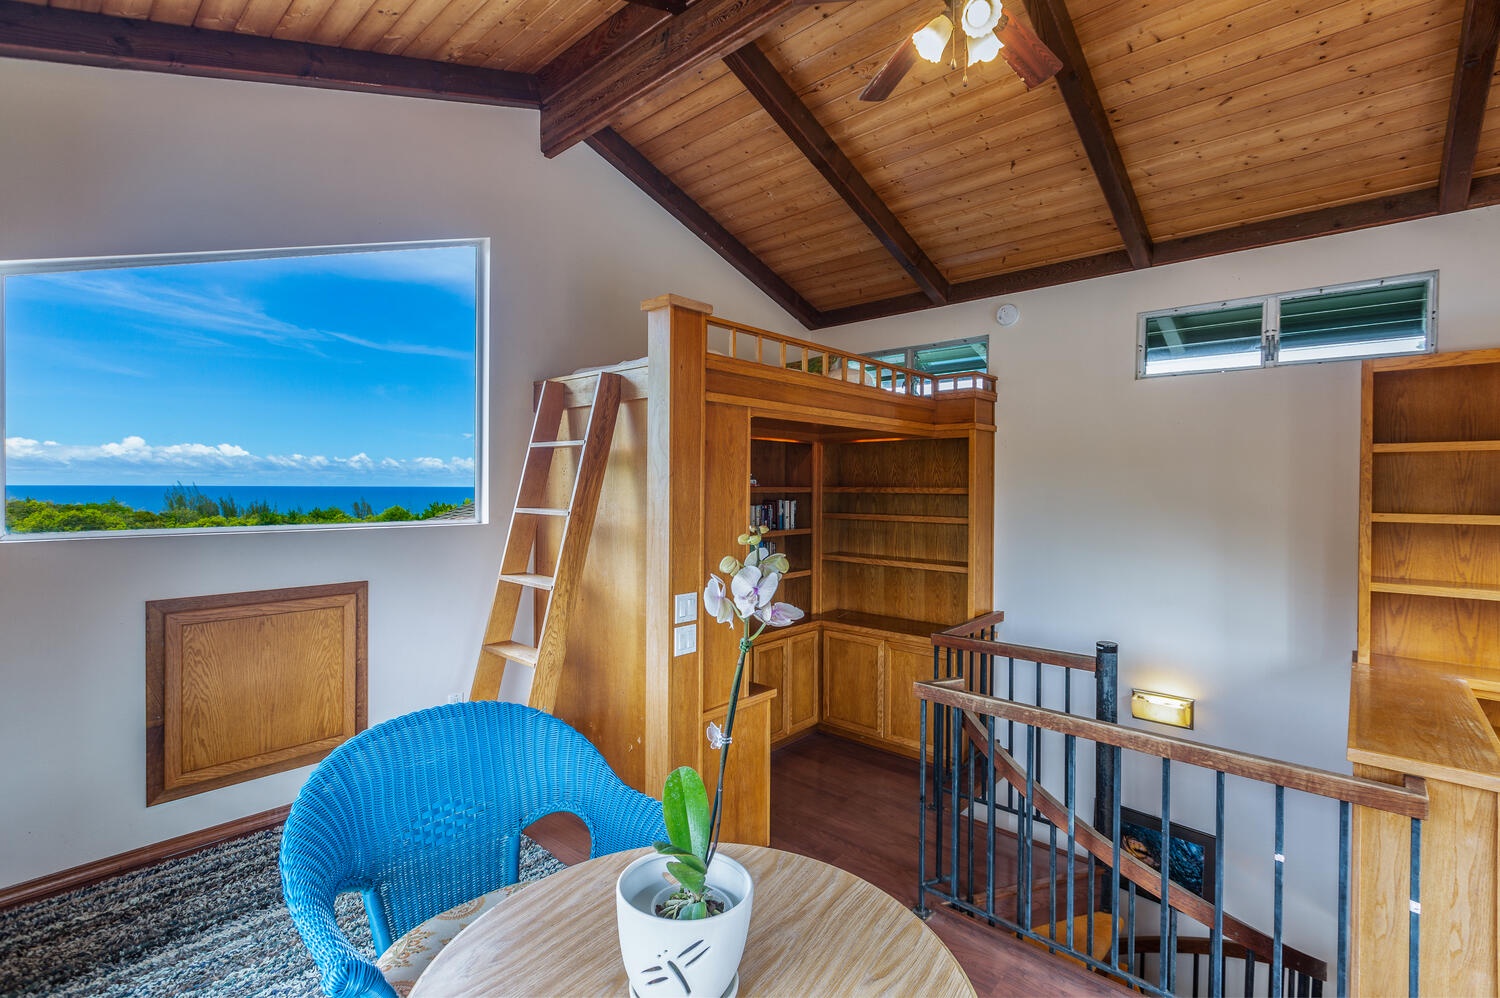 Princeville Vacation Rentals, Hale Ohia - Up the spiral staircase, you'll find Guest Bedroom 3 with a lofted twin bed and play area for the kids